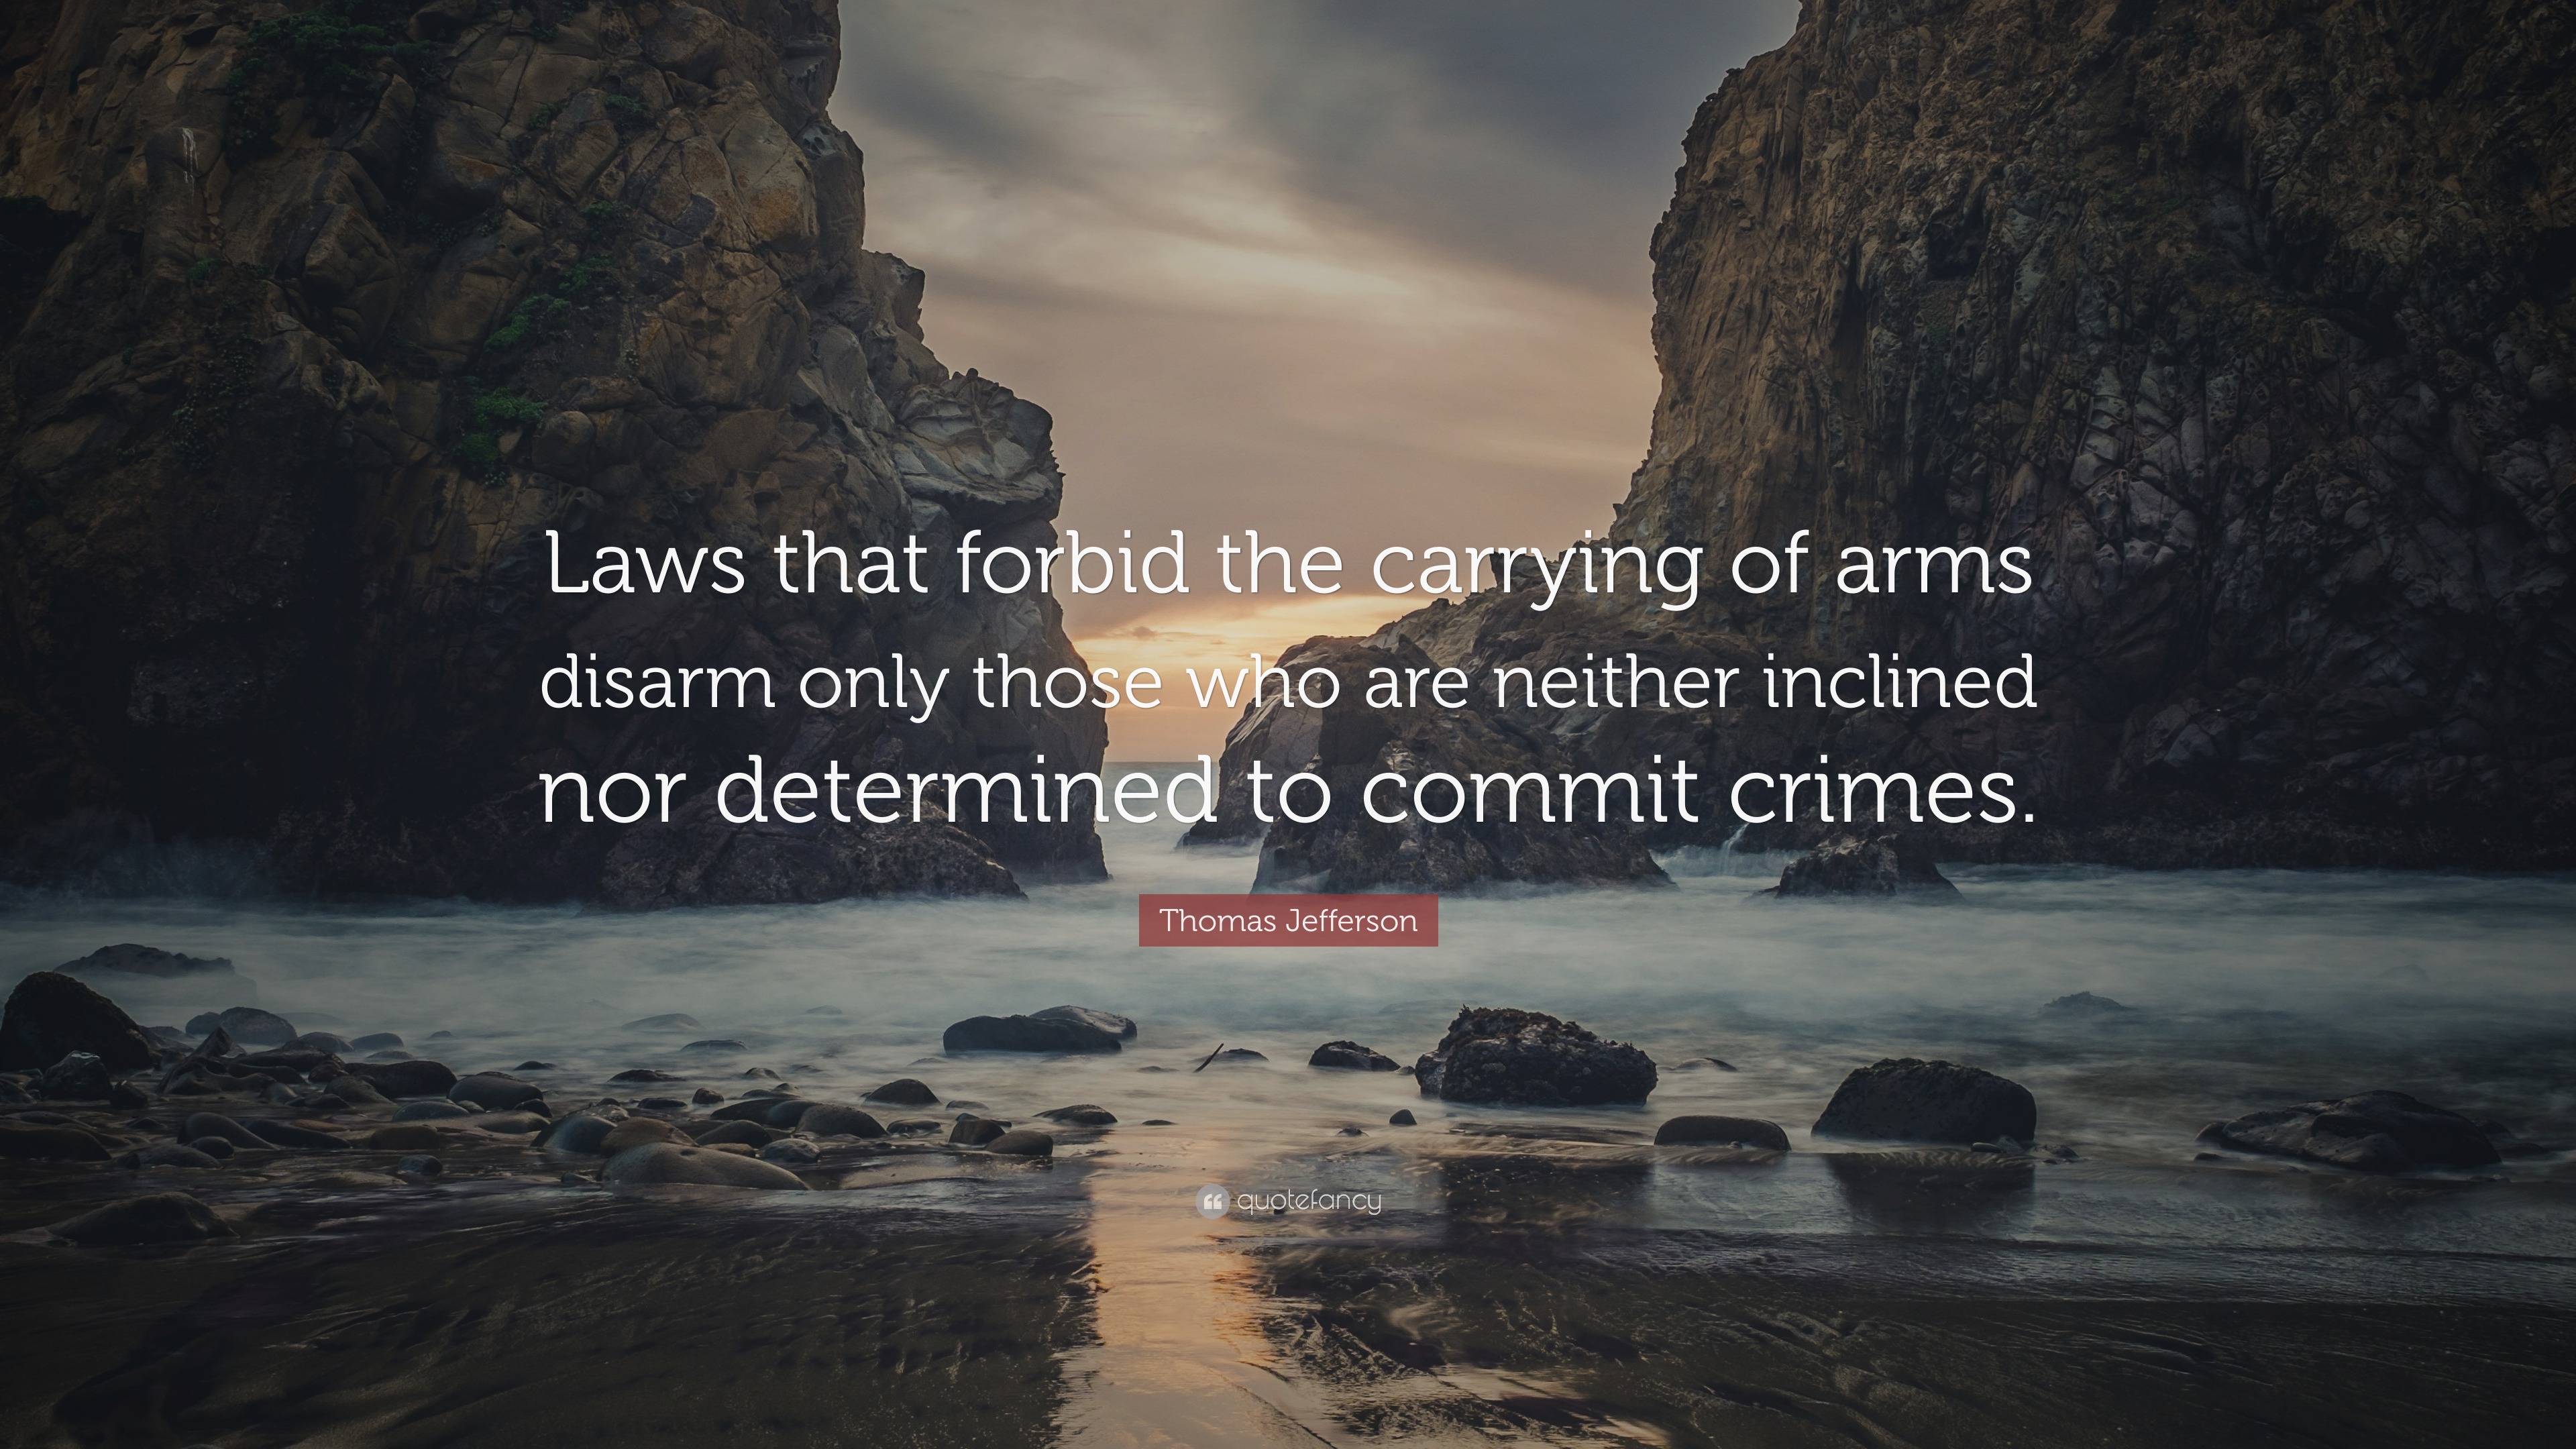 what is the word that means rights laws forbids using children in armed conflicts